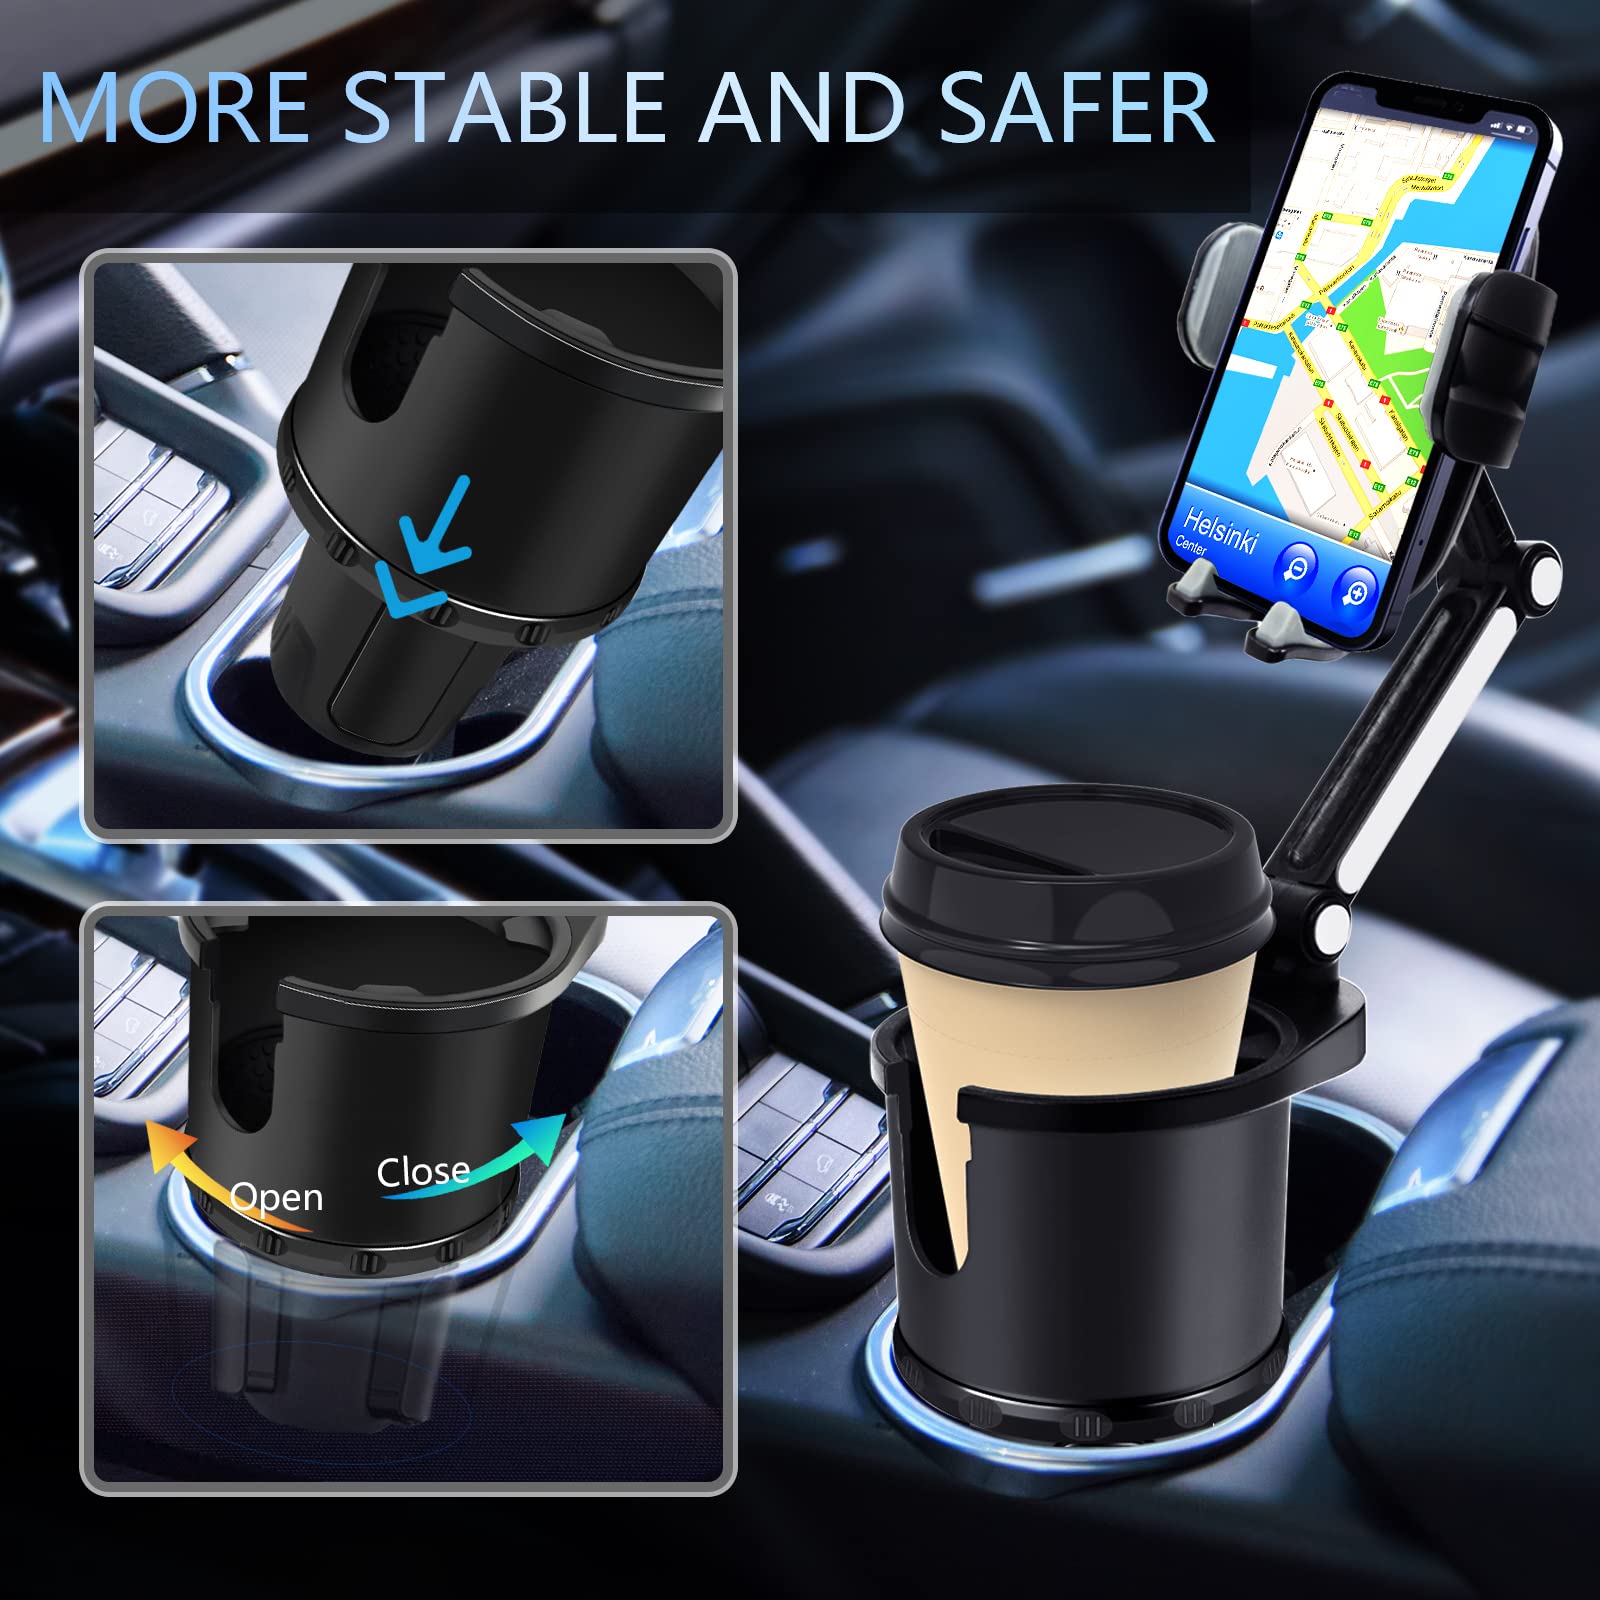 Aoisva Car Cup Holder Phone Mount Adjustable Base with 360° Rotation Universal Multifunctional Cup Holder Cell Phone Holder for Car Fits Any iPhone & Galaxy & All Smartphones [Upgrade 2 in 1]